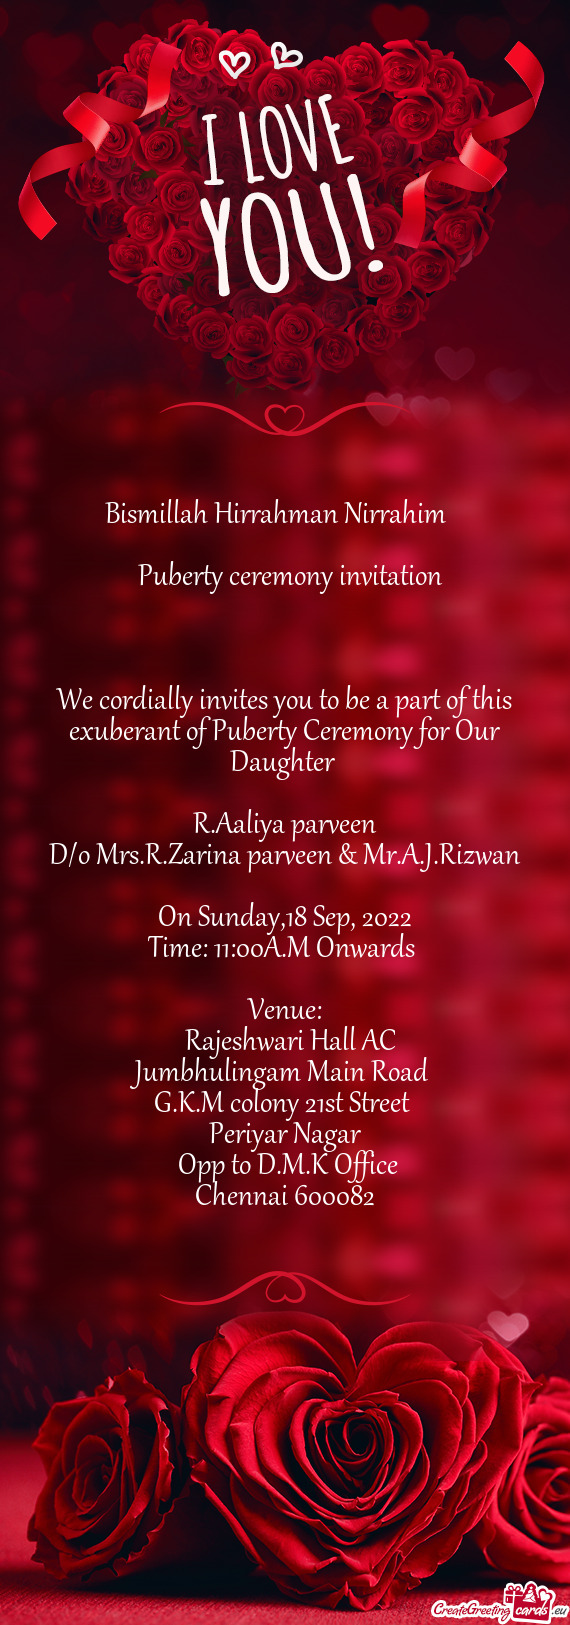 We cordially invites you to be a part of this exuberant of Puberty Ceremony for Our Daughter